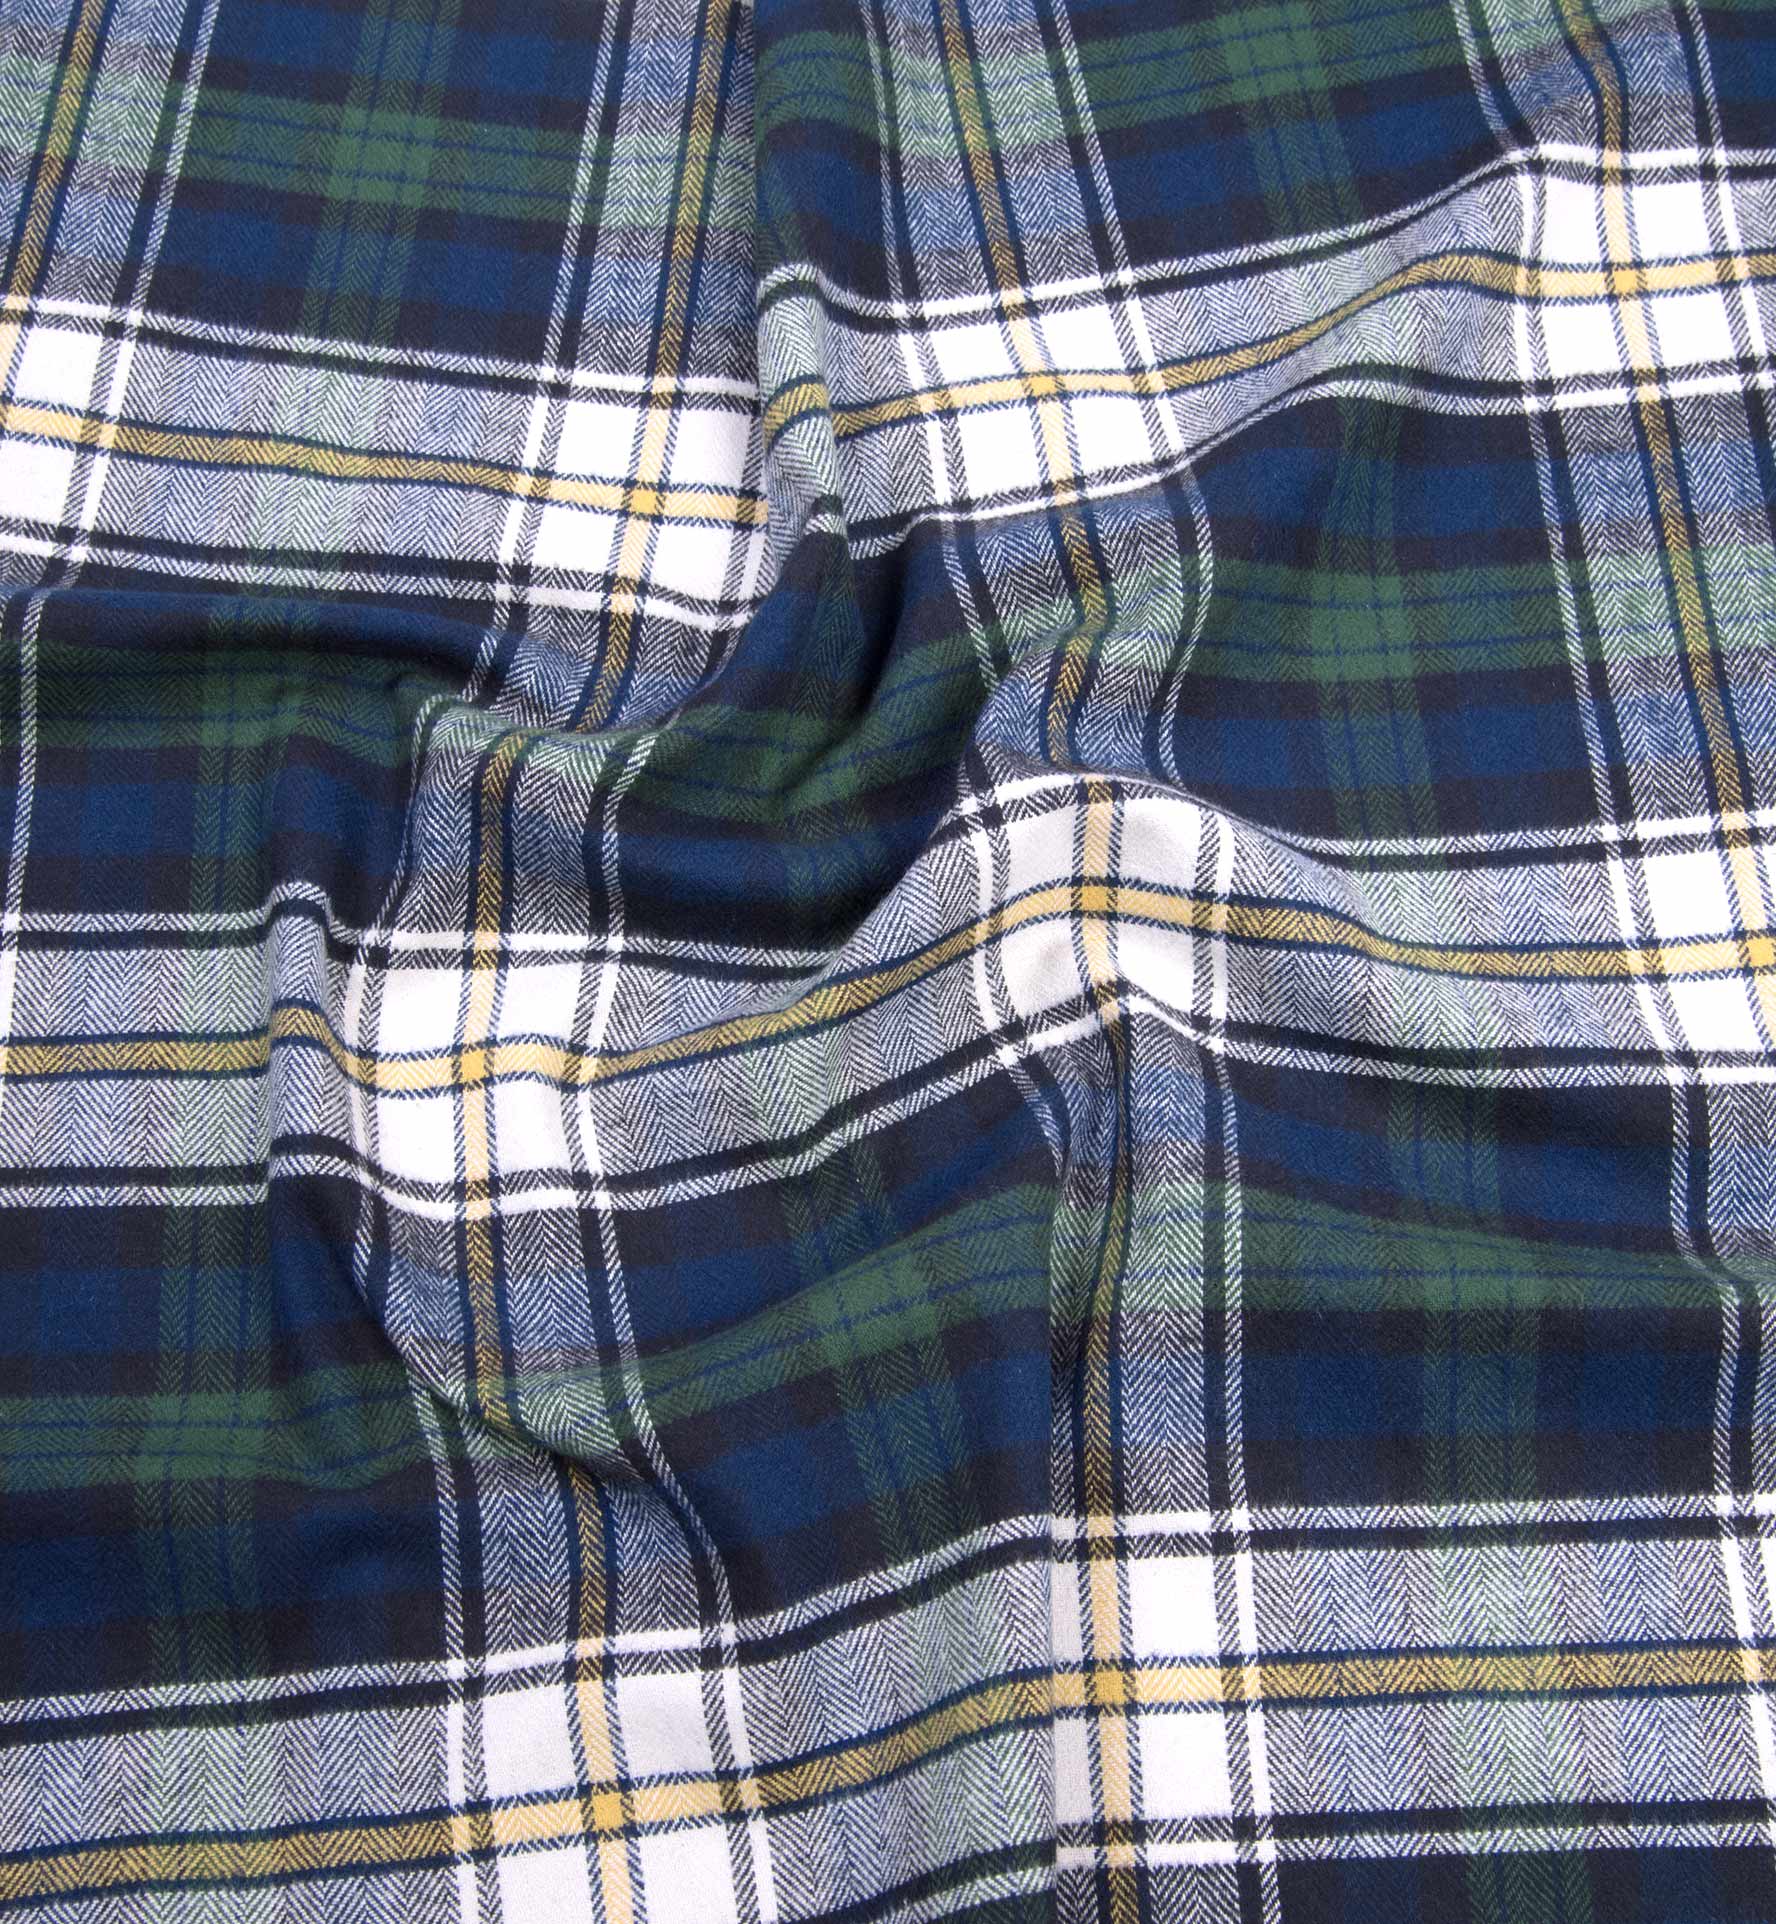 Green and Blue Plaid Country Flannel Shirts by Proper Cloth